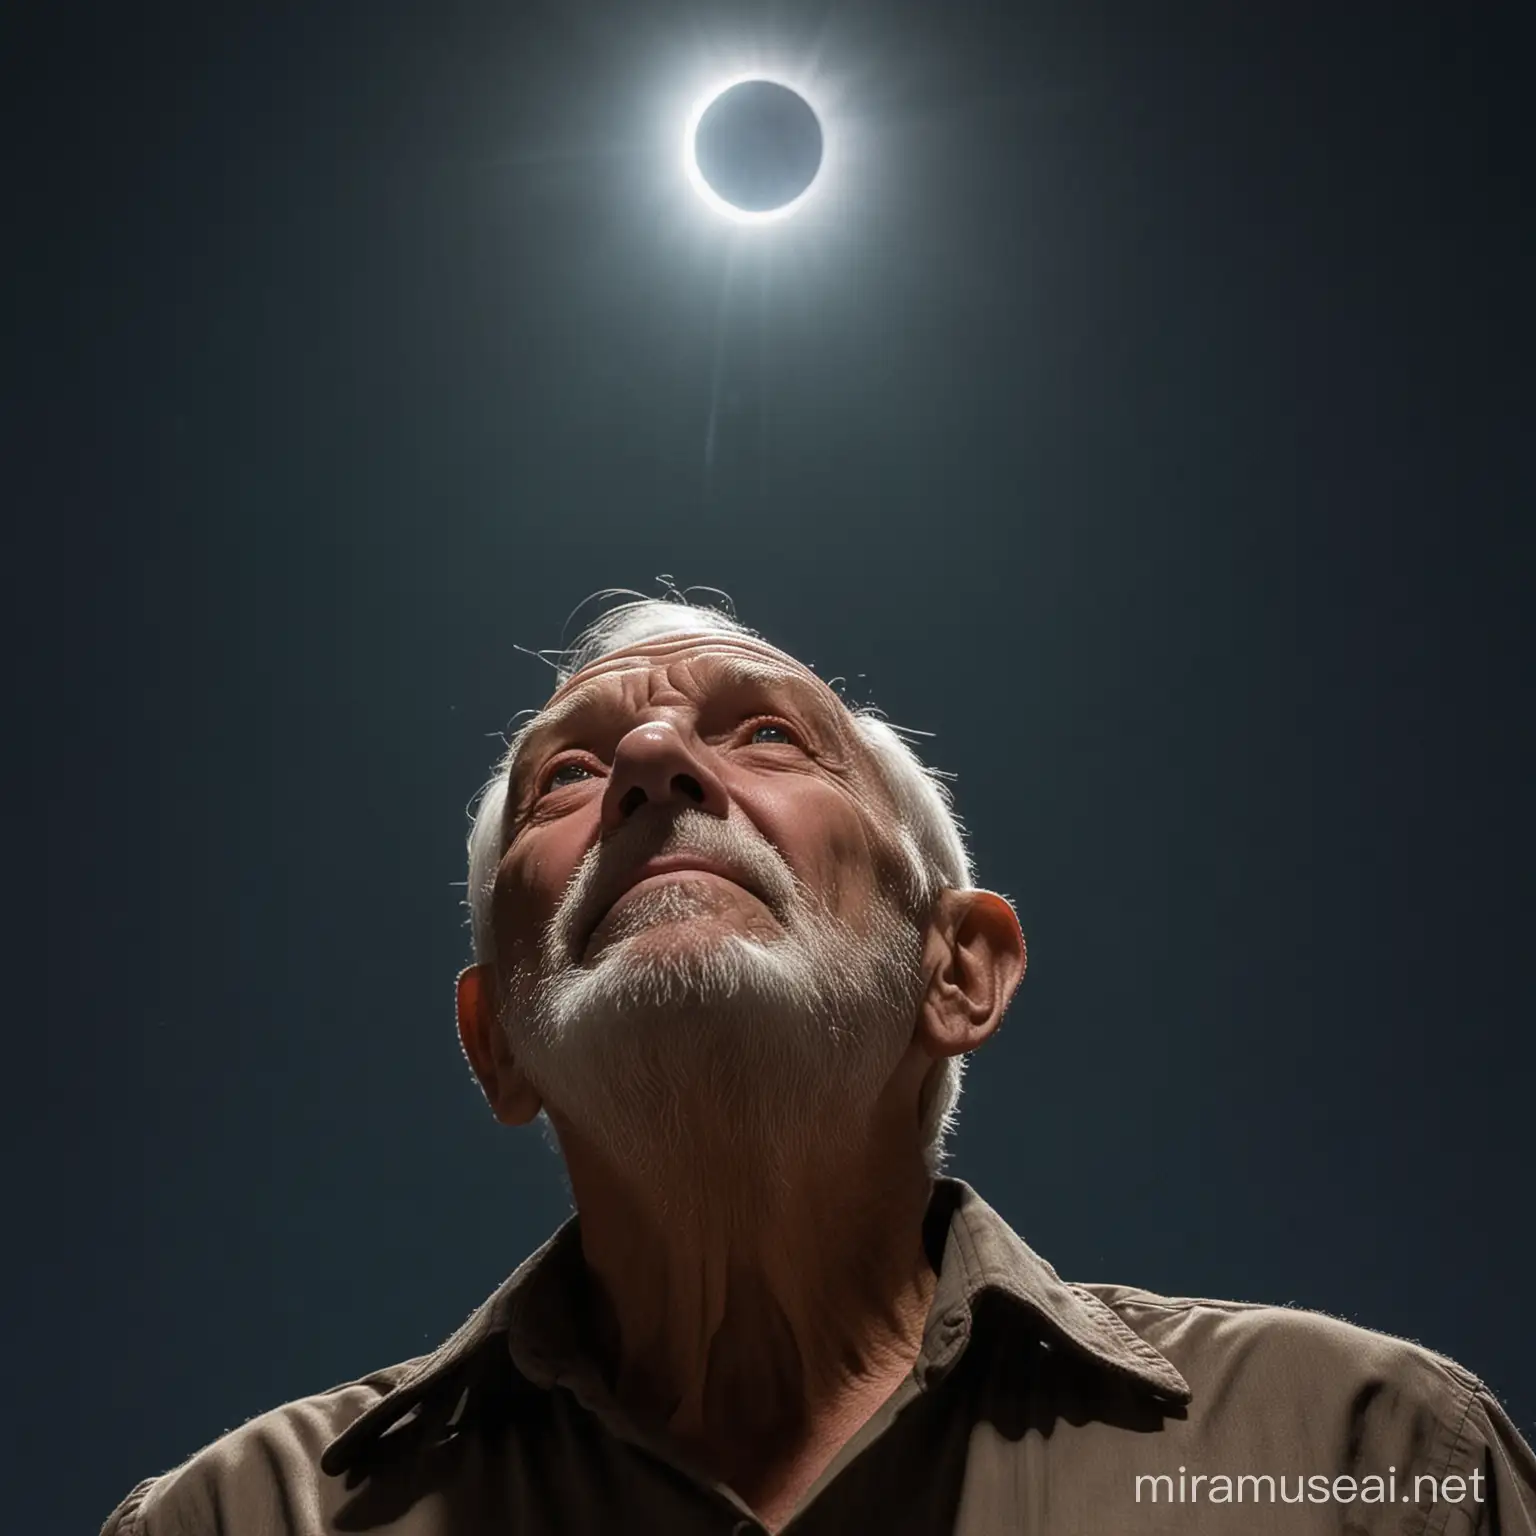 Old man looking up during an eclipse at night